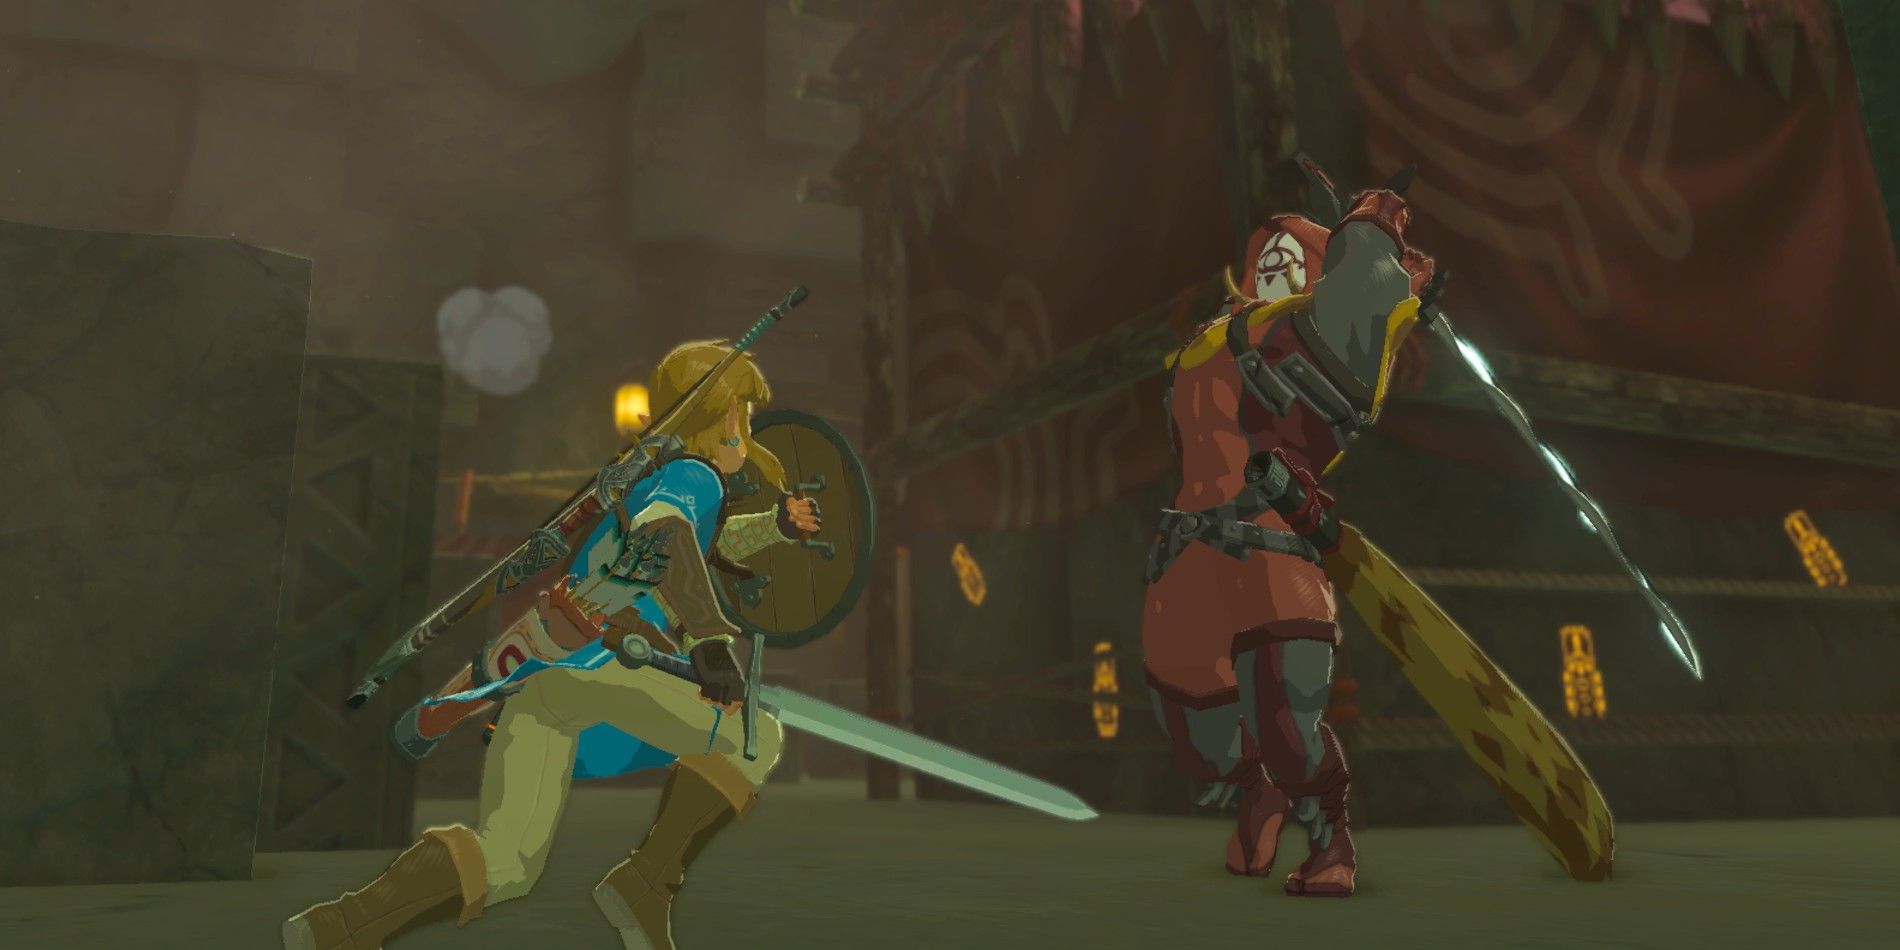 New weapons in BOTW 2 could make combat much more exciting.